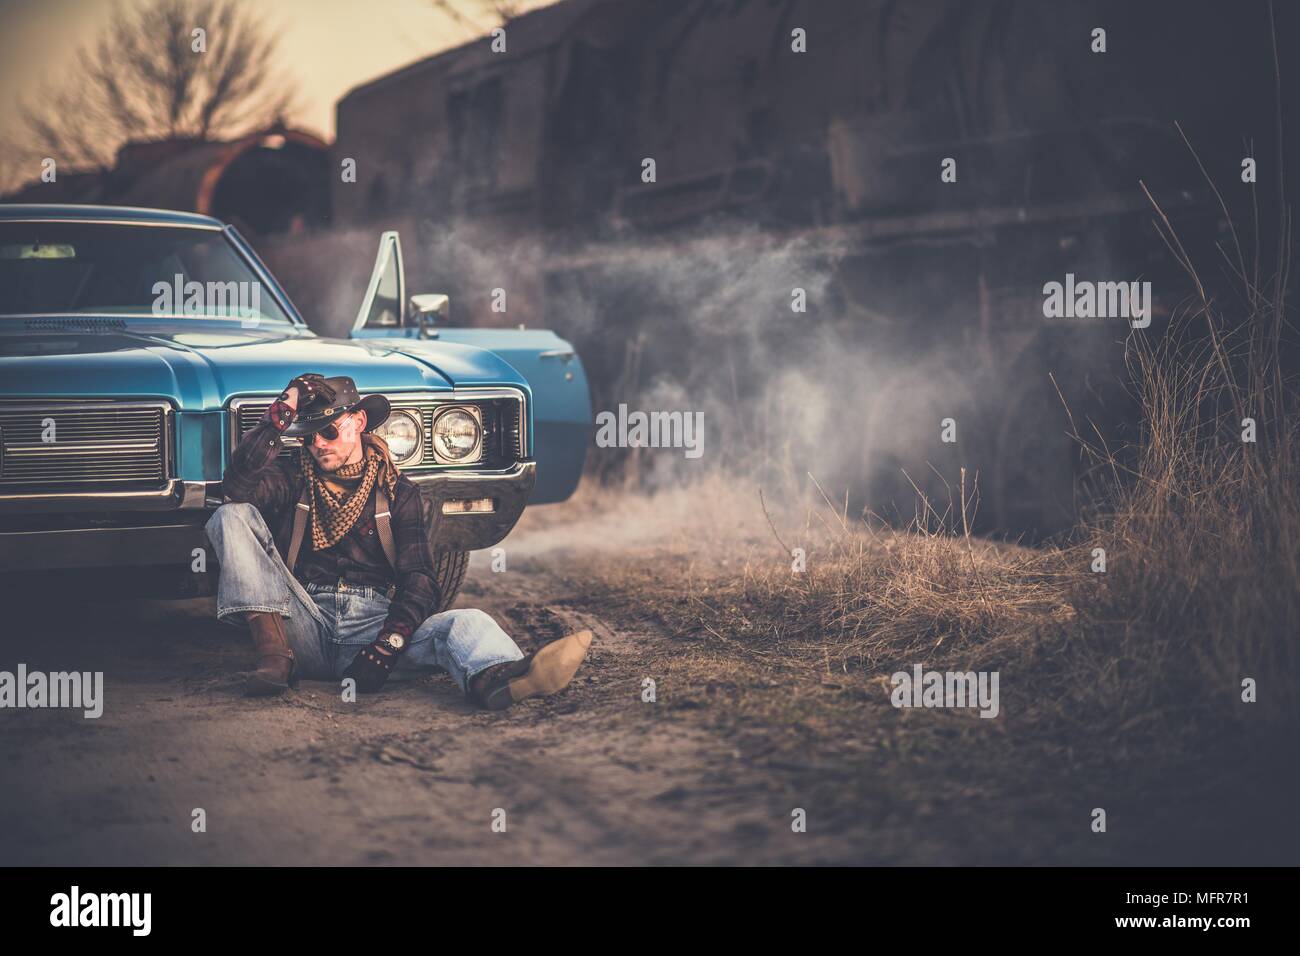 The American Cowboy Story. Caucasian Men Wearing Western Style Clothes and Cowboy Hat, Taking a Moment in Front of His American Classic Muscle Car. Ag Stock Photo